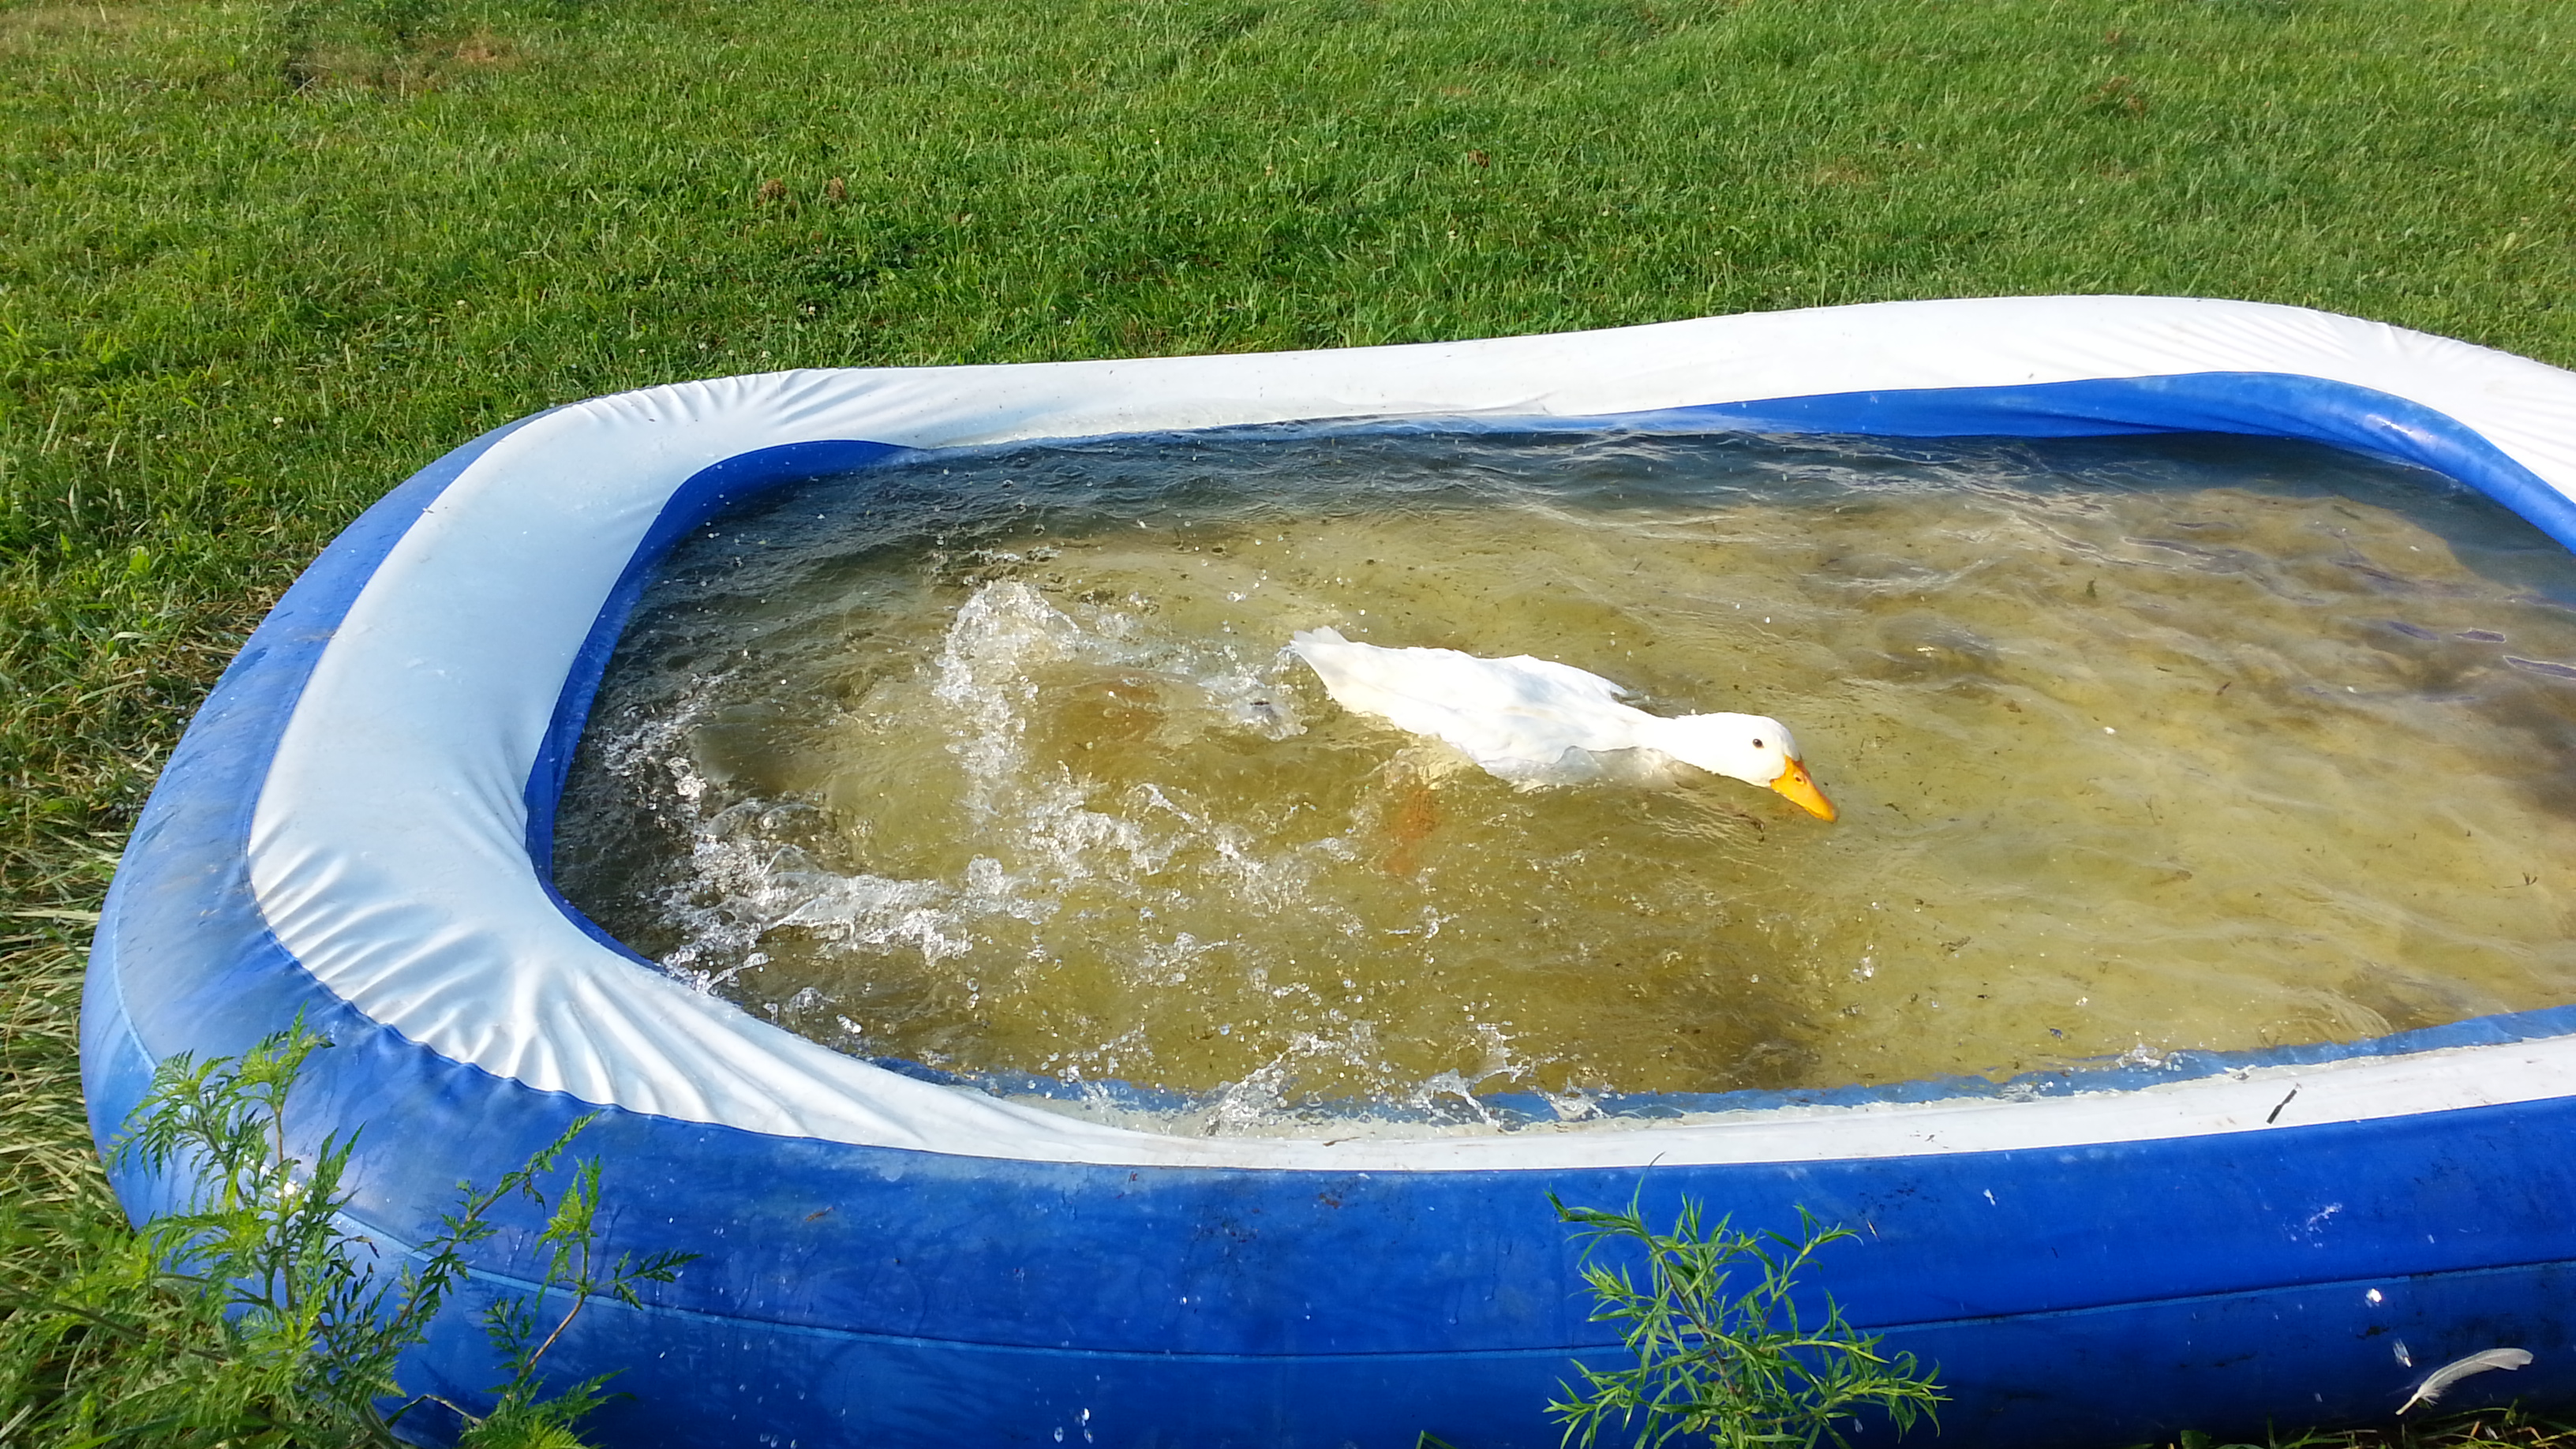 goof is under water...daisy is on top